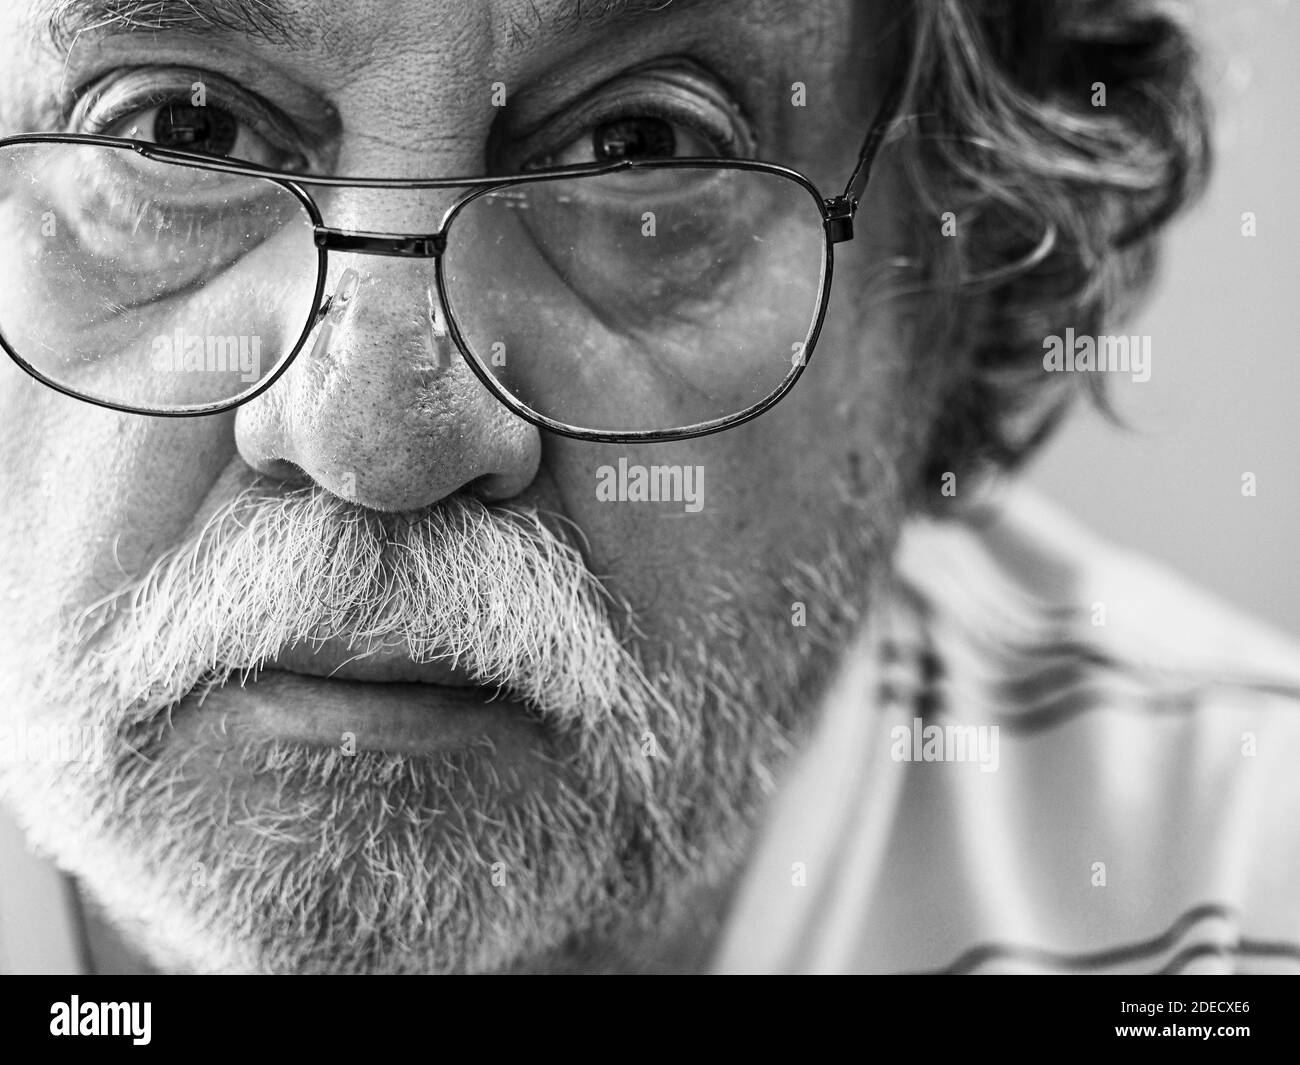 Black and white portrait of Caucasian middle-aged man with a mustache and a beard on his face Stock Photo